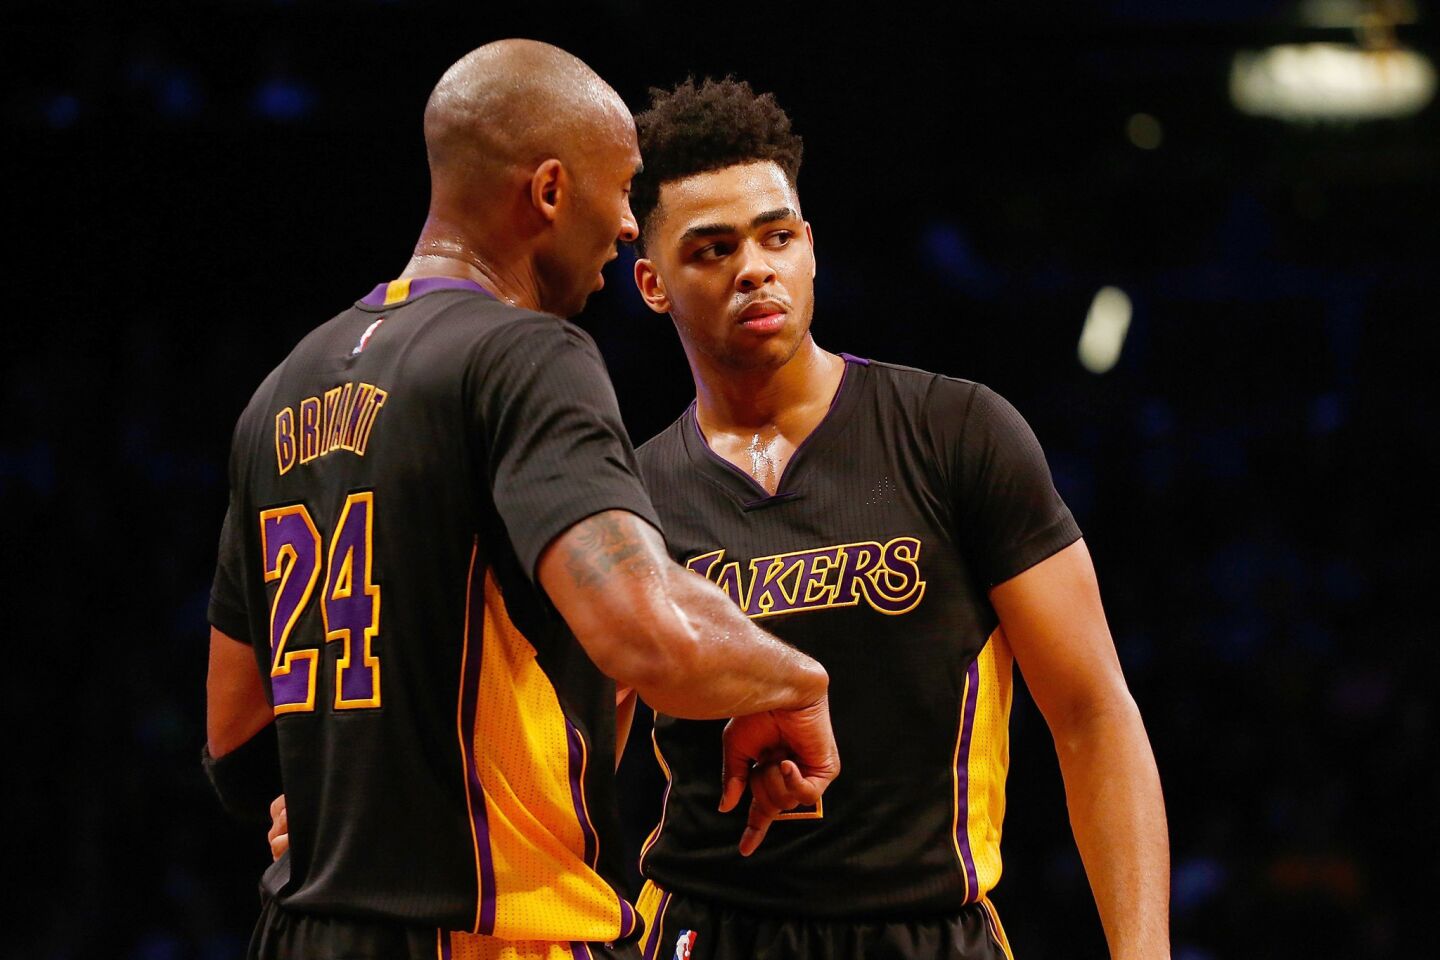 Los Angeles Lakers' Kobe Bryant (24) and D'Angelo Russell (1) talk during the game against the Brooklyn Nets on Friday.